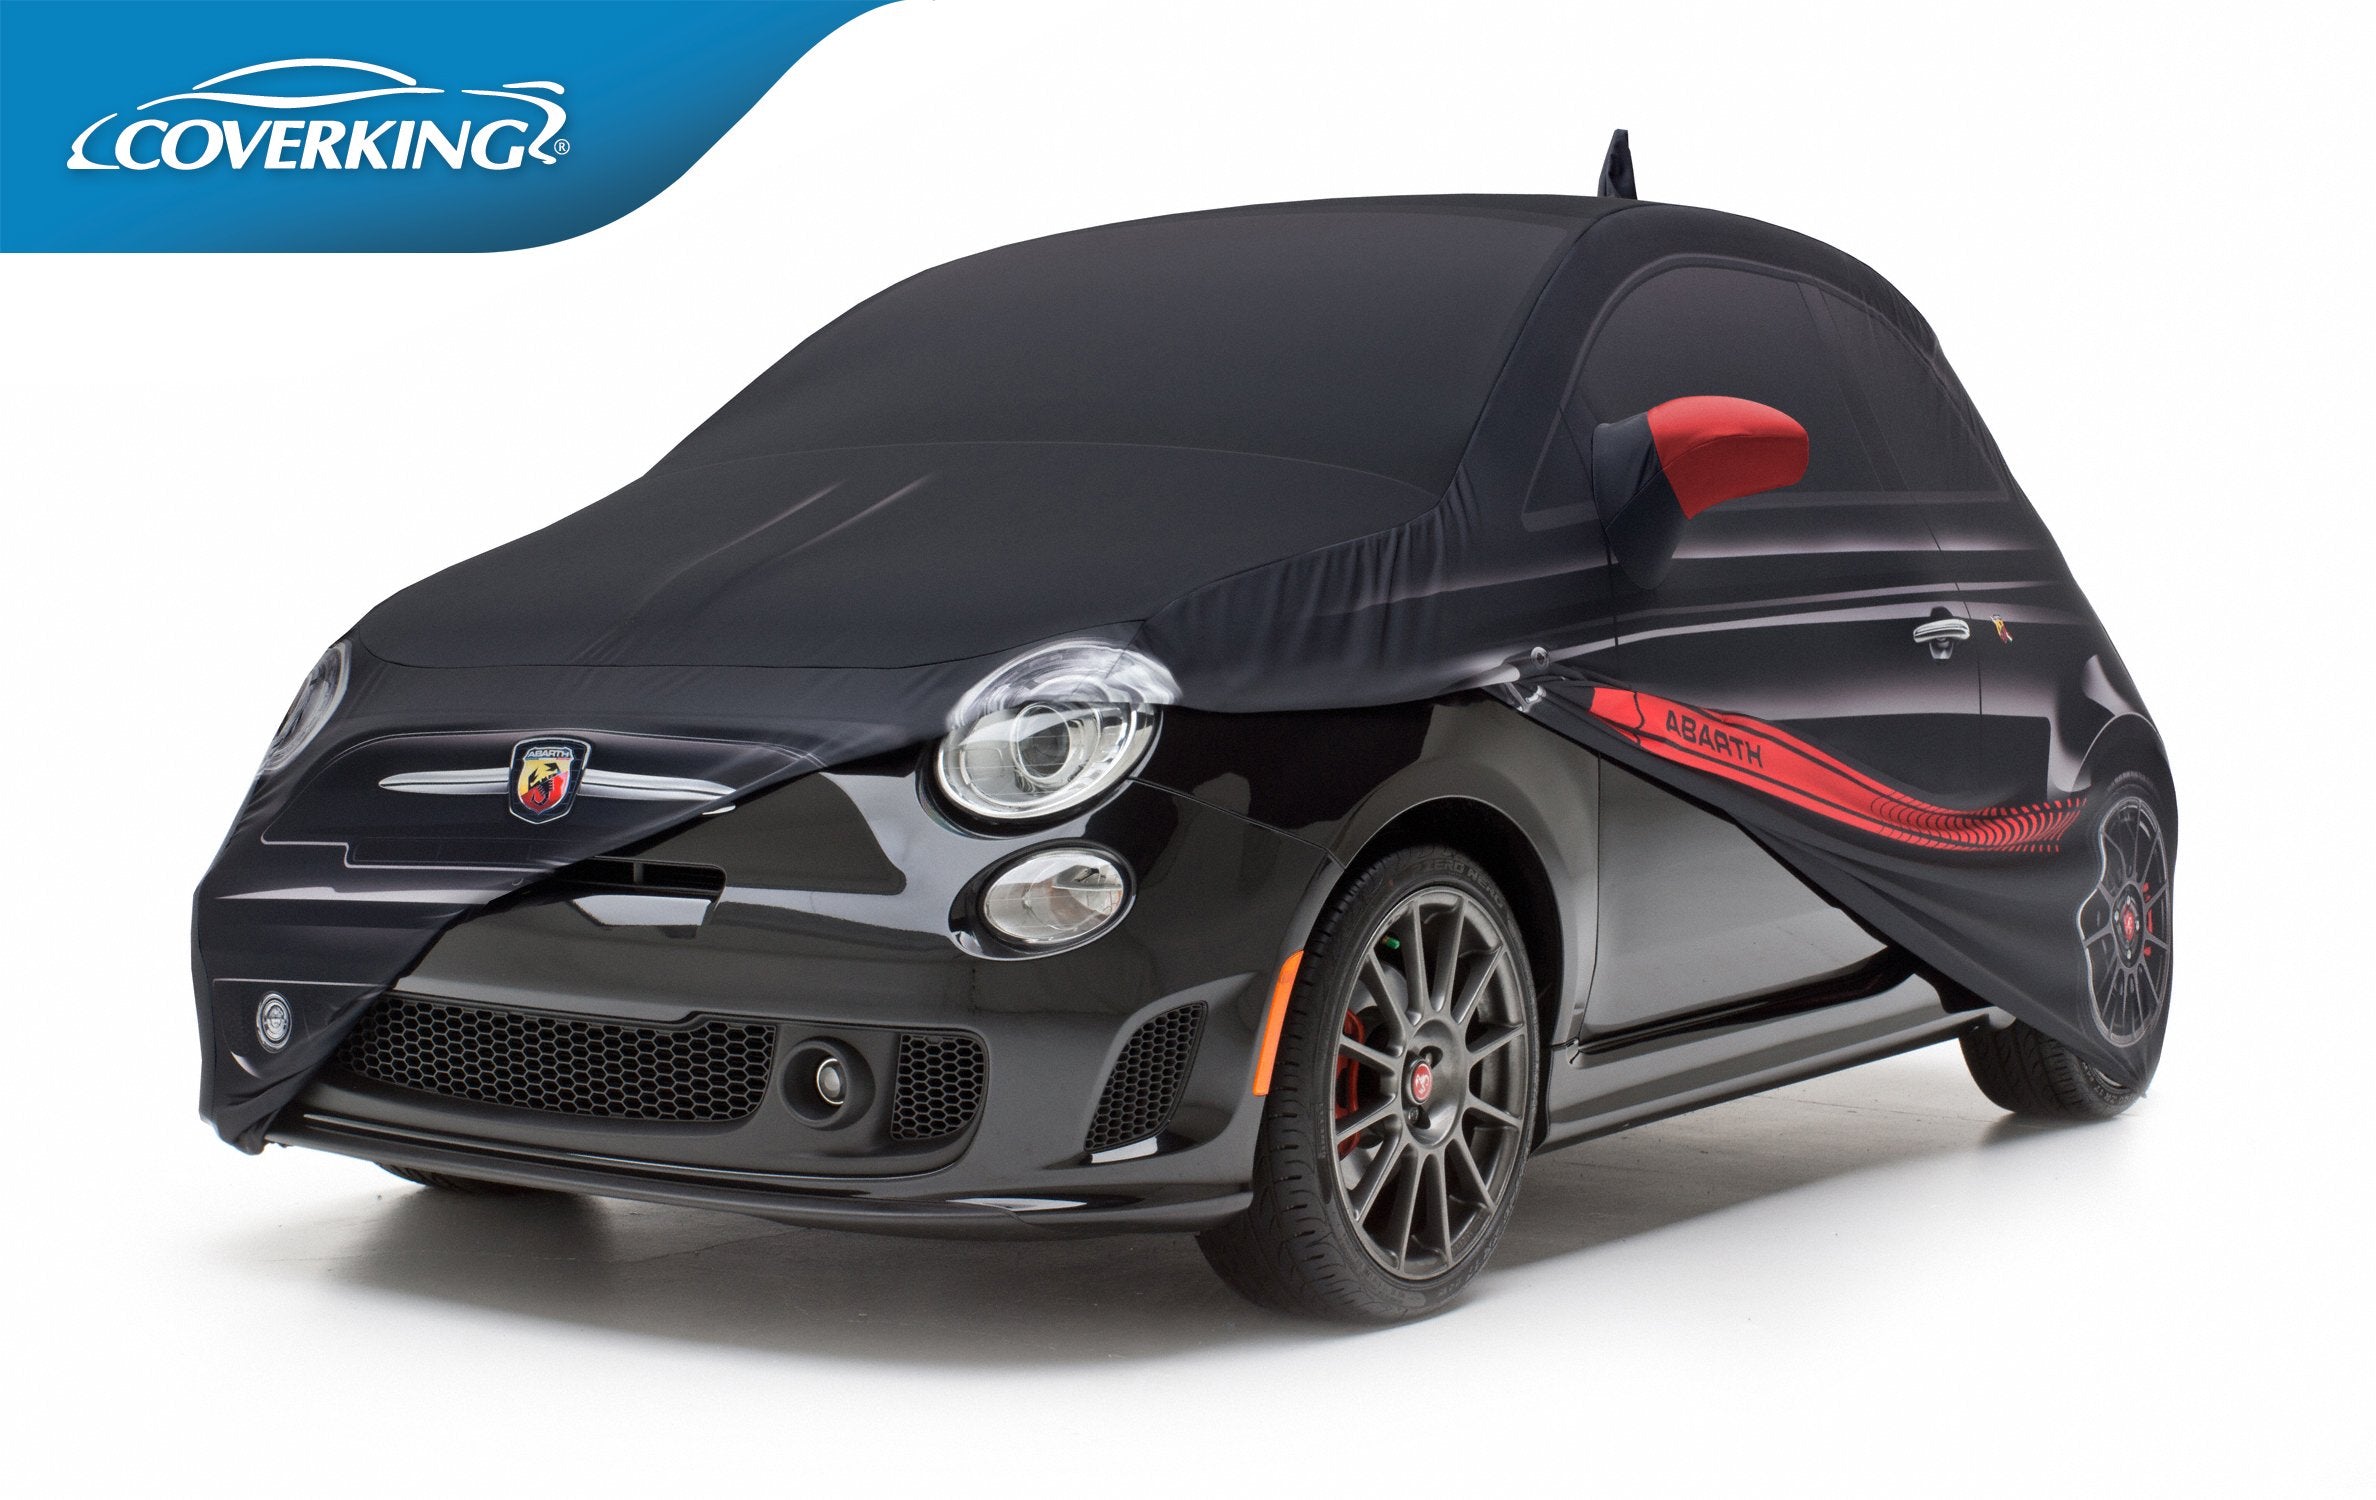 Explore the Best Custom Printed Car Covers from Coverking